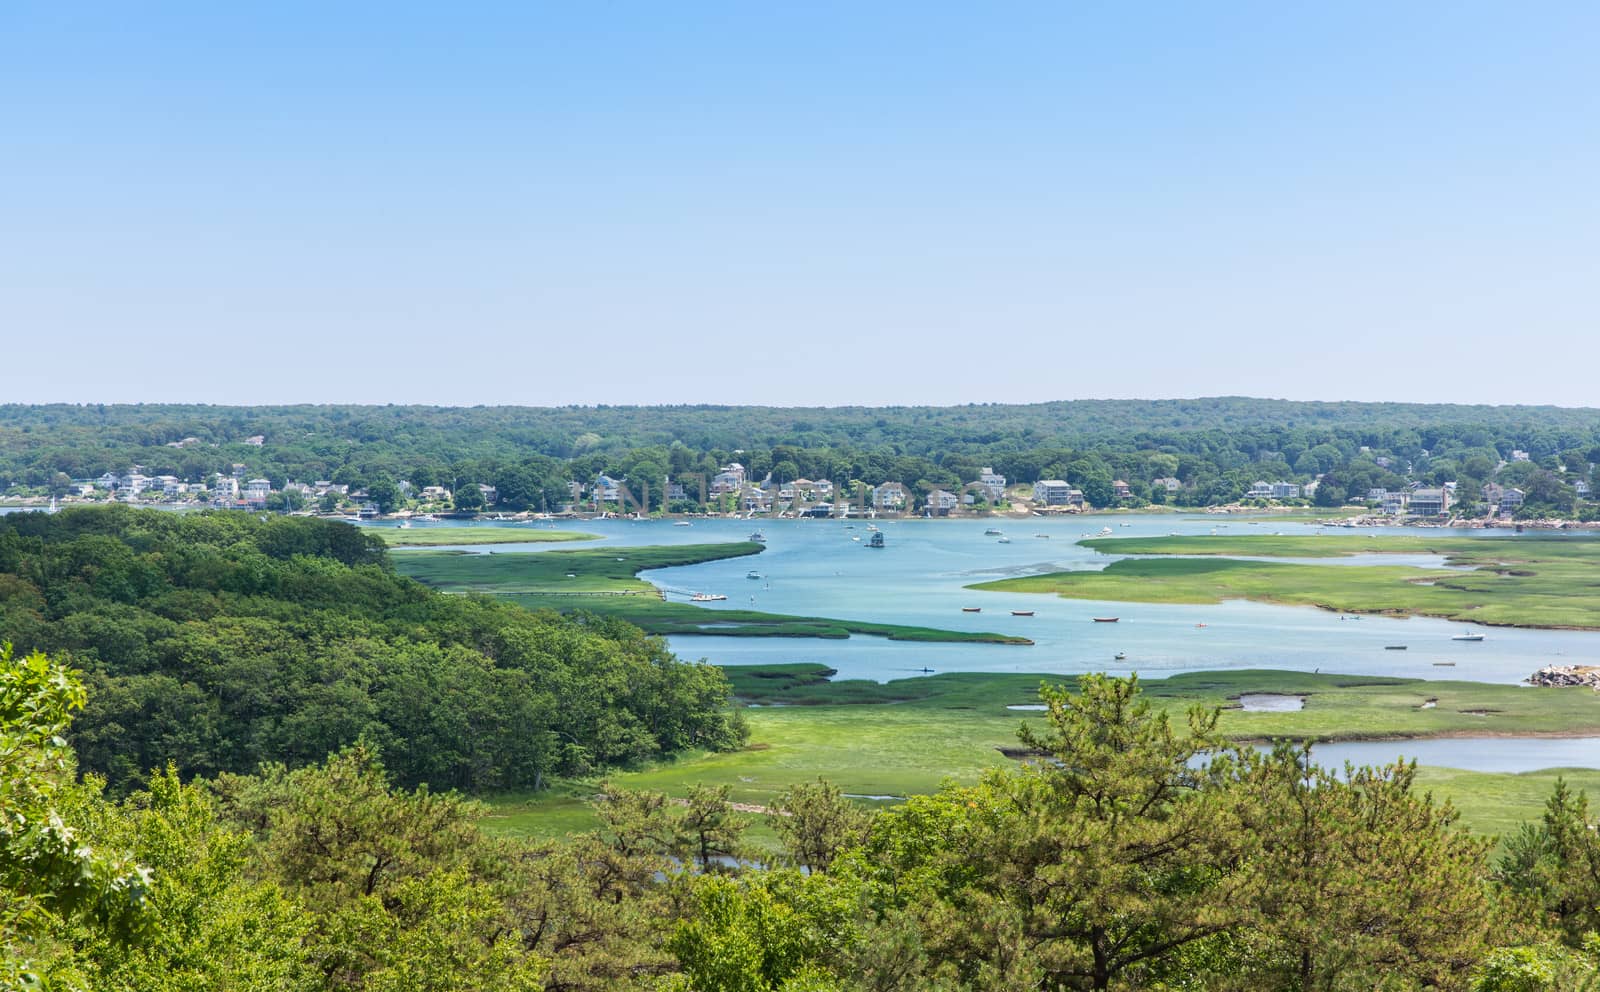 This is a view of the Cape Ann Annisquam River area near Gloucester Massachusetts.